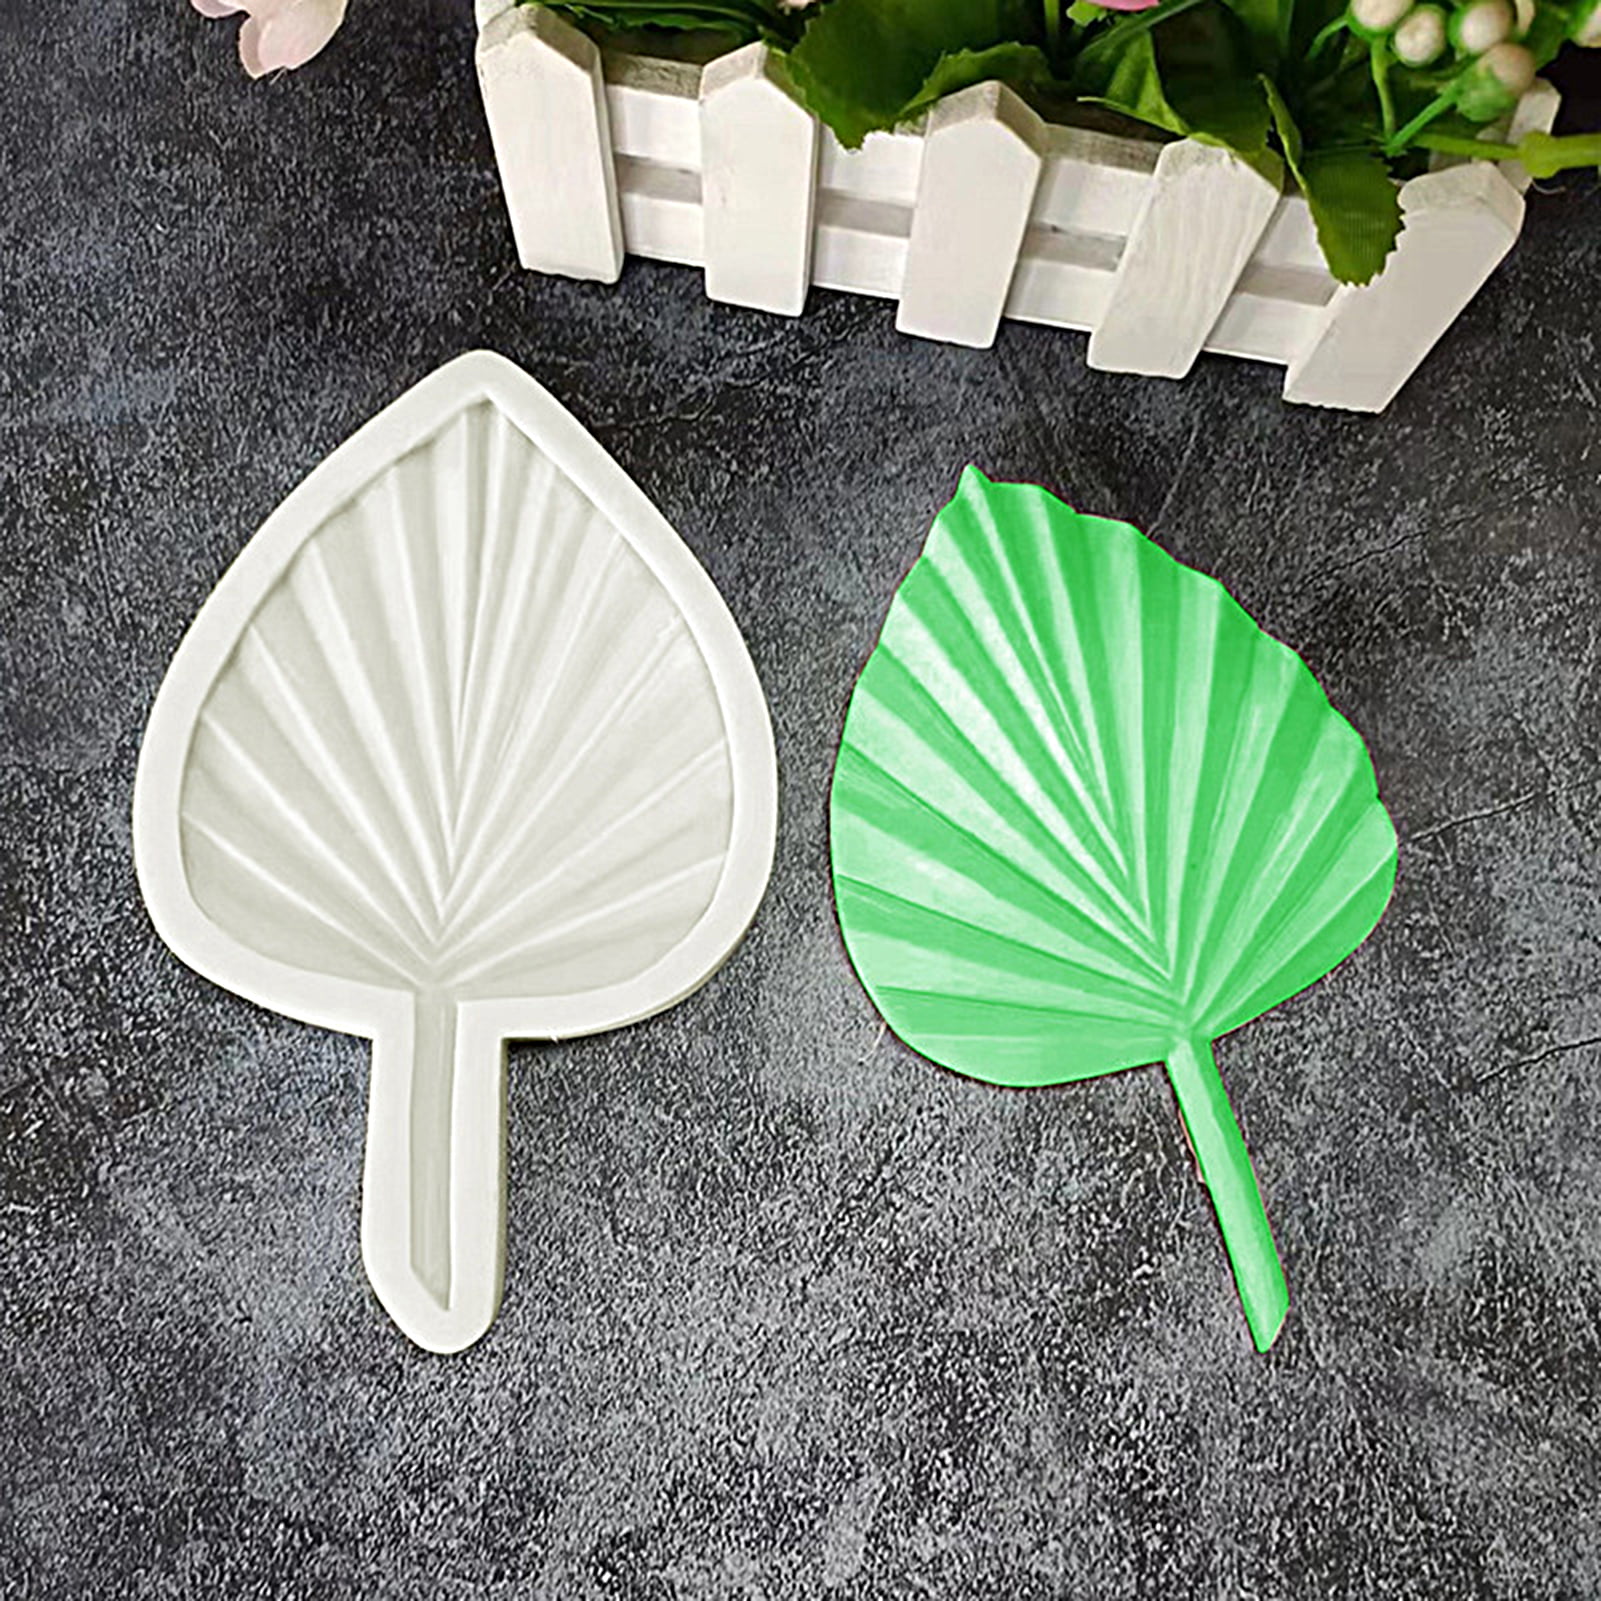 Details about   Silicone Cake Mold 3D Leaf Shape Fondant Decorating Bakeware Tool Accessories LP 